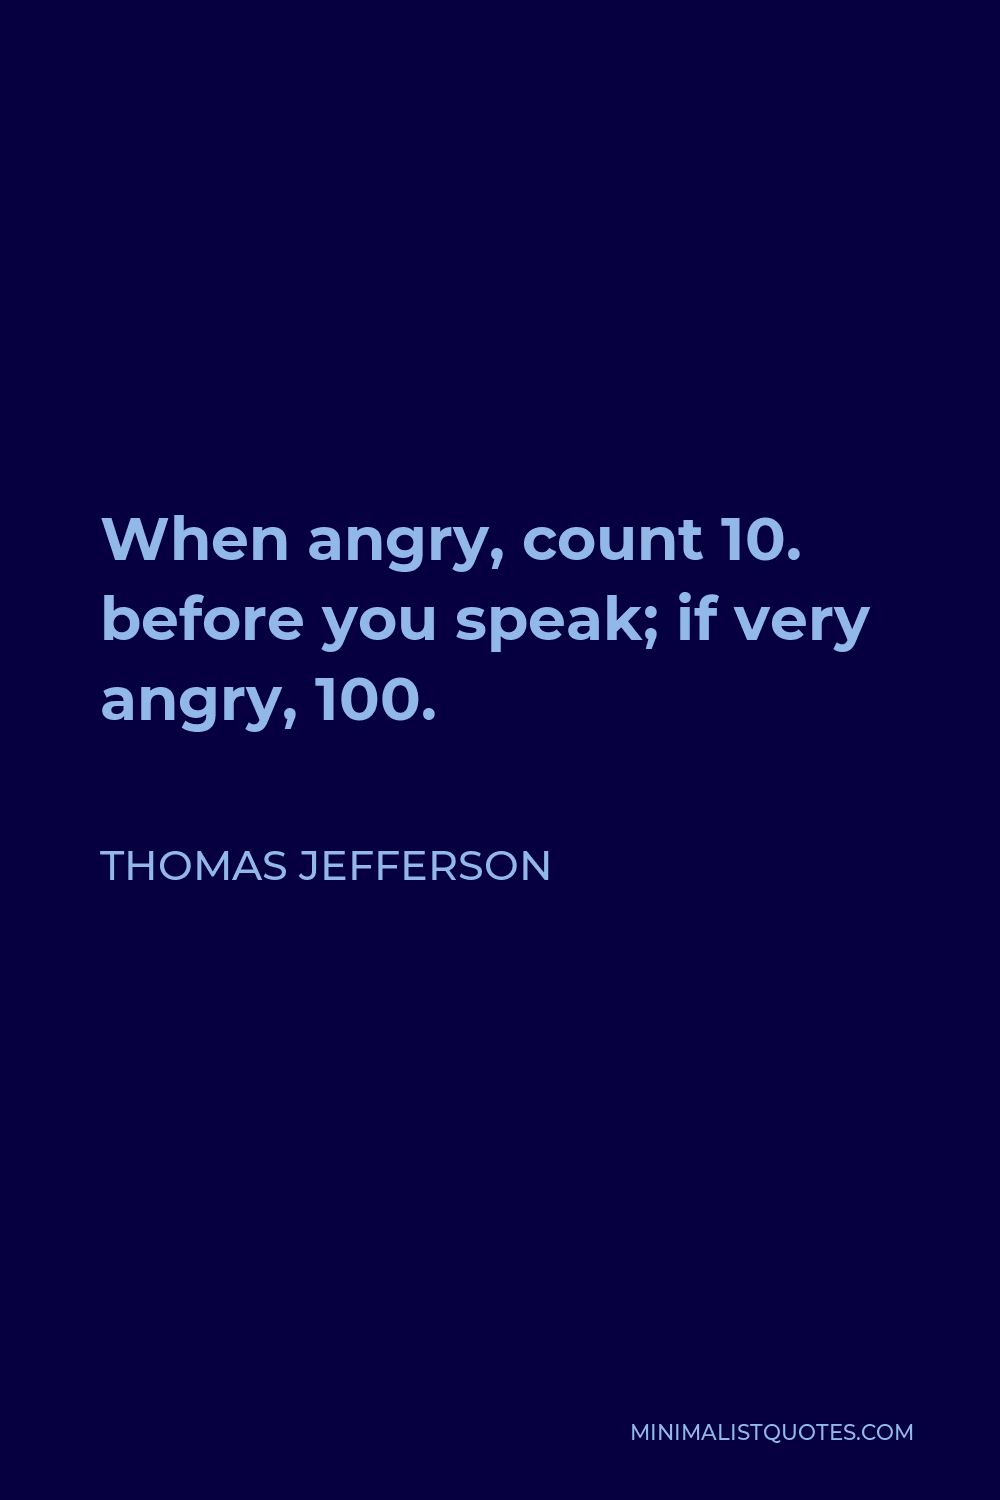 Thomas Jefferson Quote - When angry, count 10. before you speak; if very angry, 100.